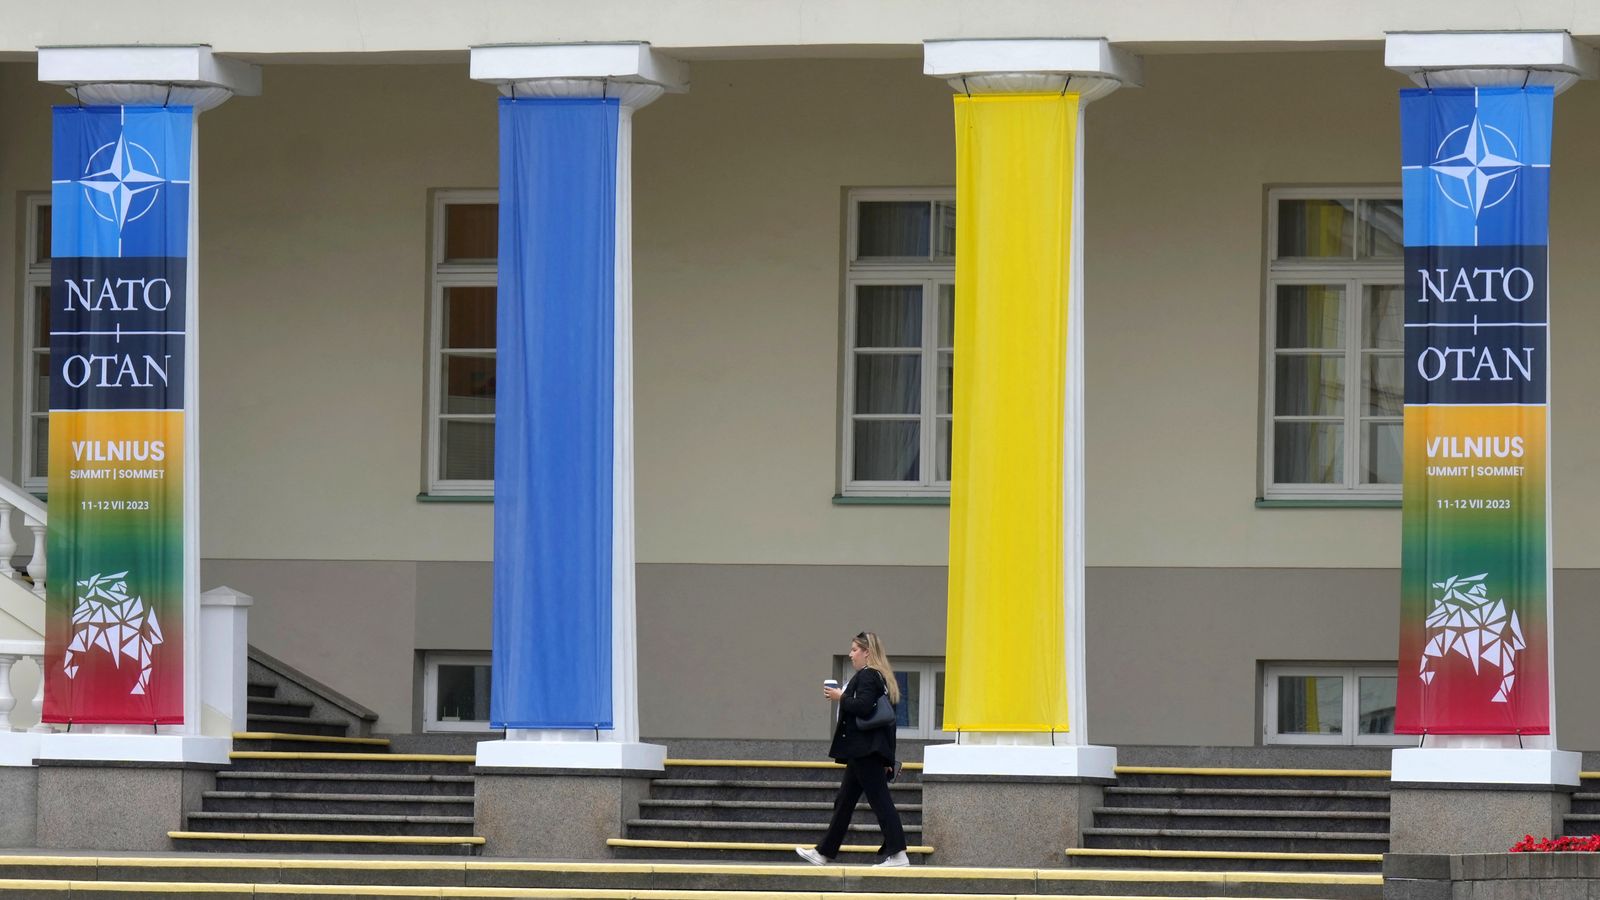 Despite major lobbying by Kyiv, speedy accession to NATO is very unlikely